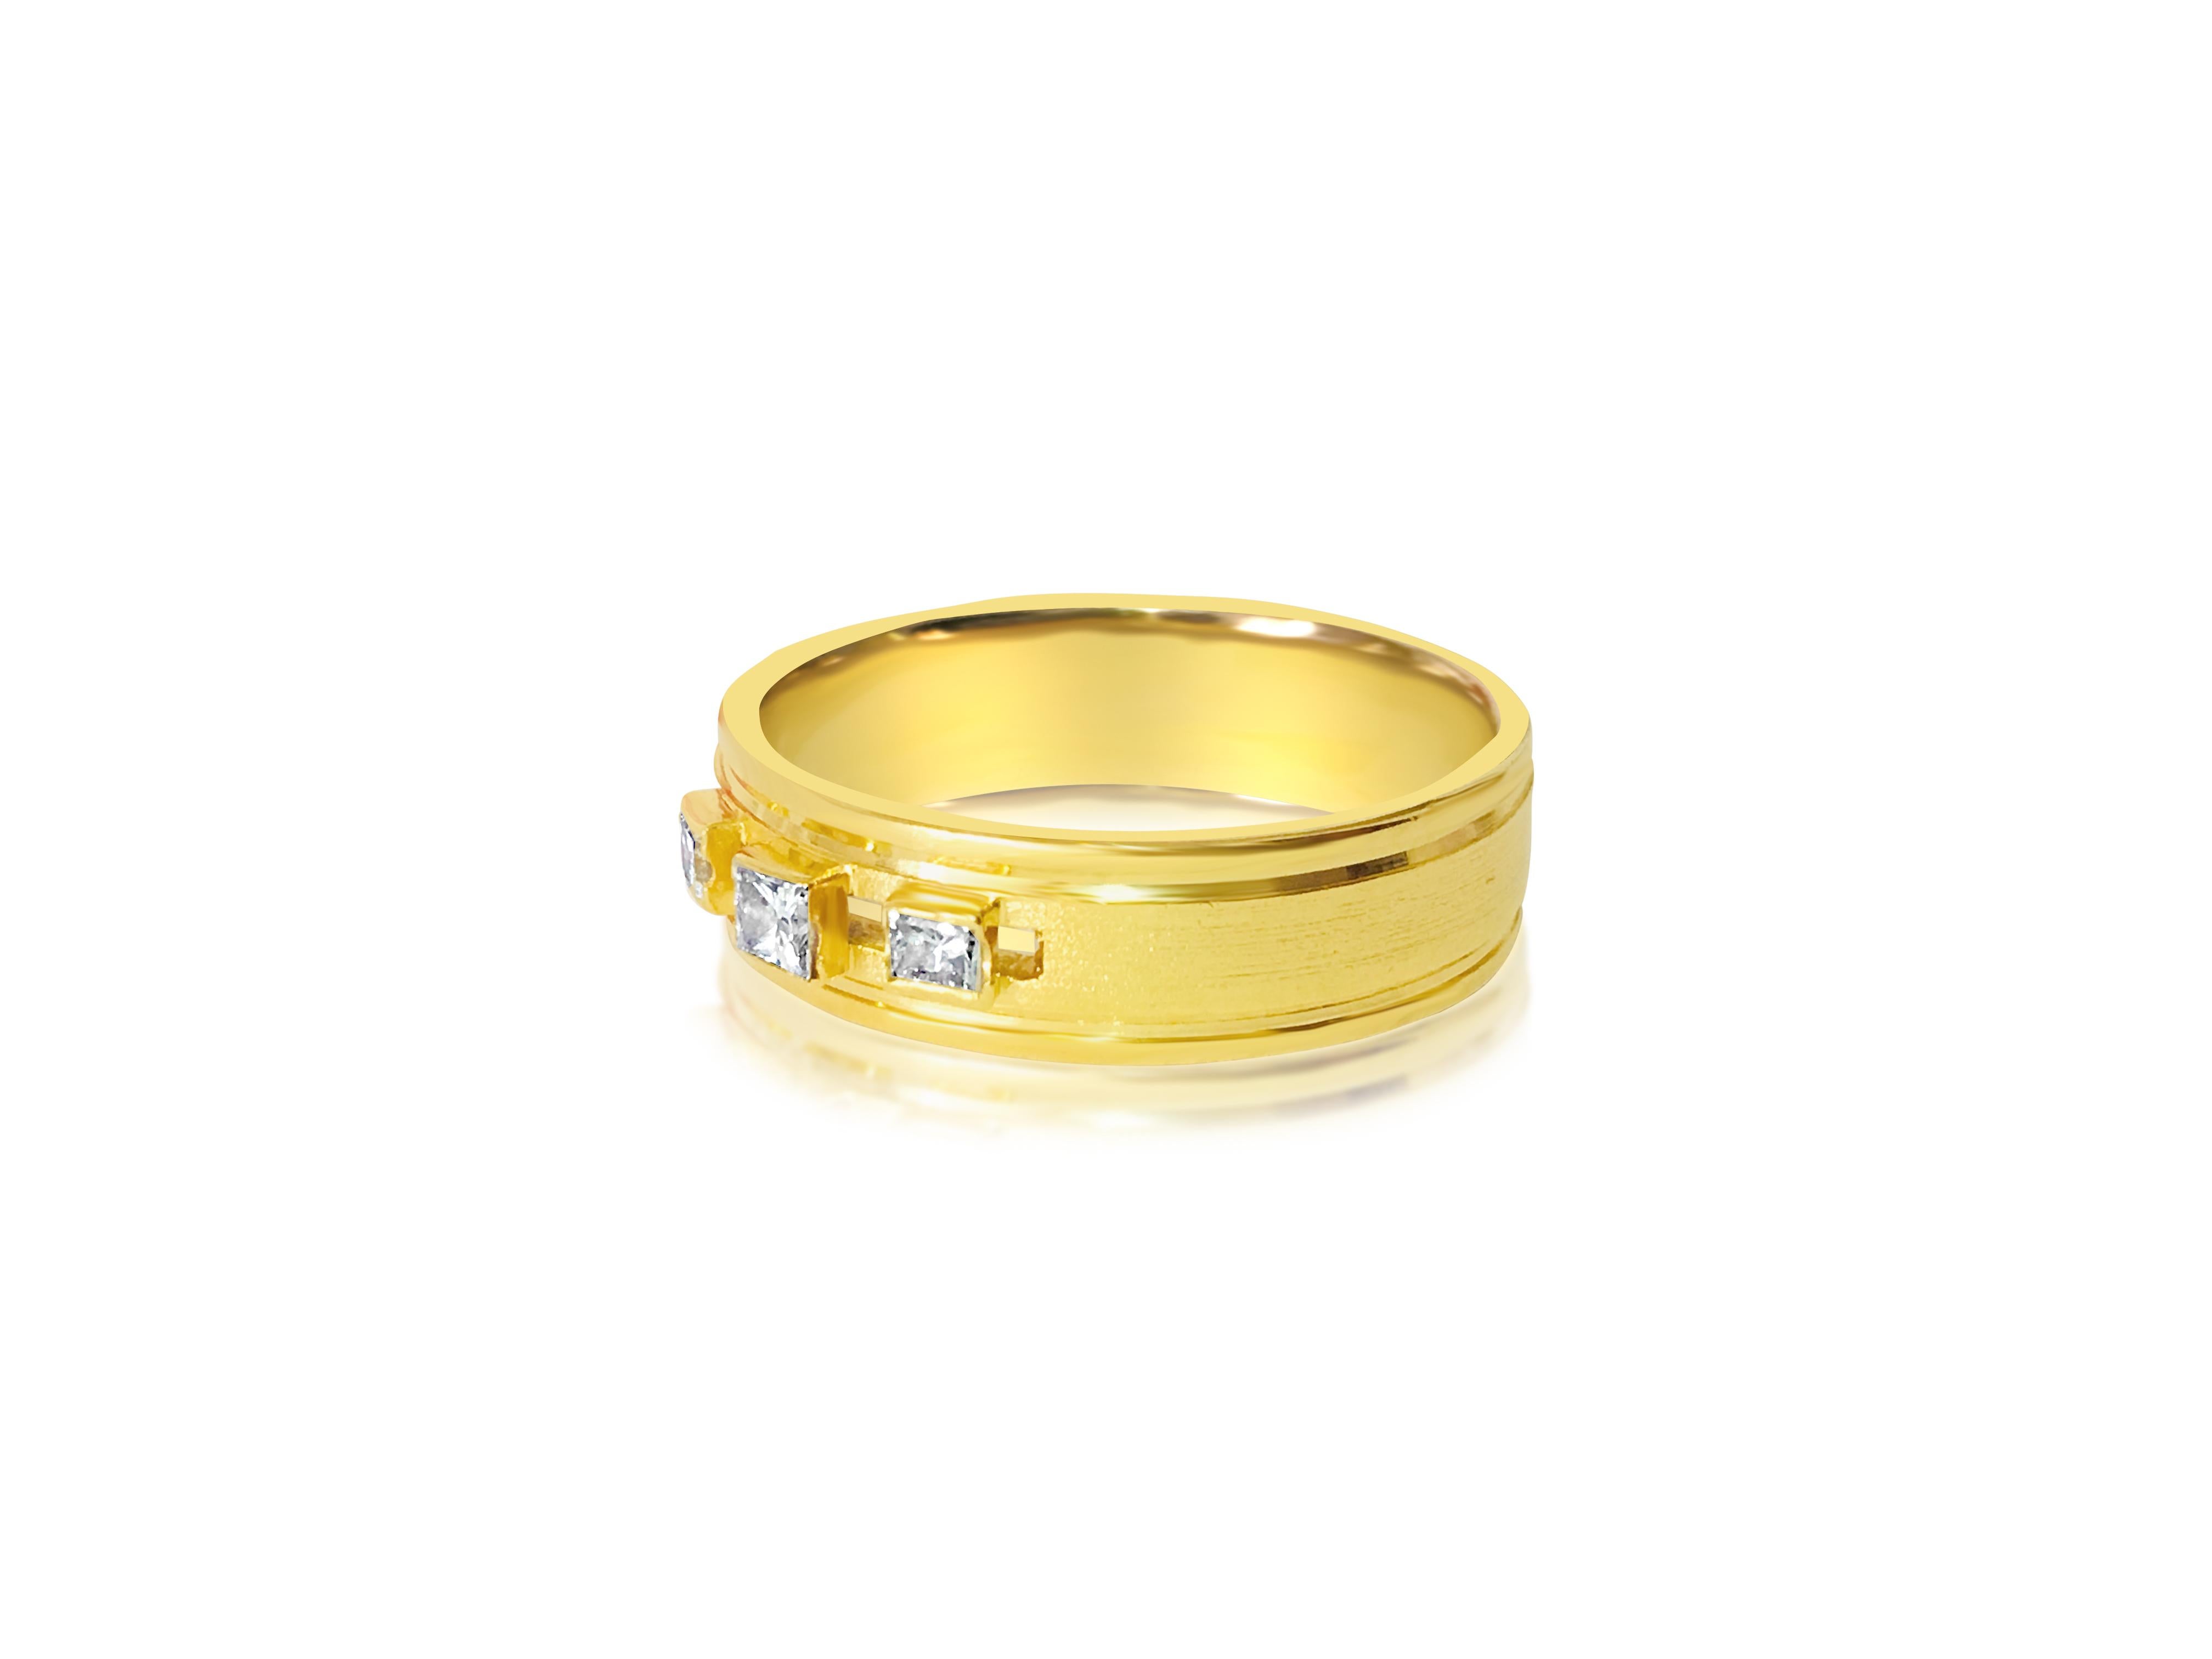 0.55 Carat VS Diamond and 18K Yellow Gold Ring In Excellent Condition For Sale In Miami, FL